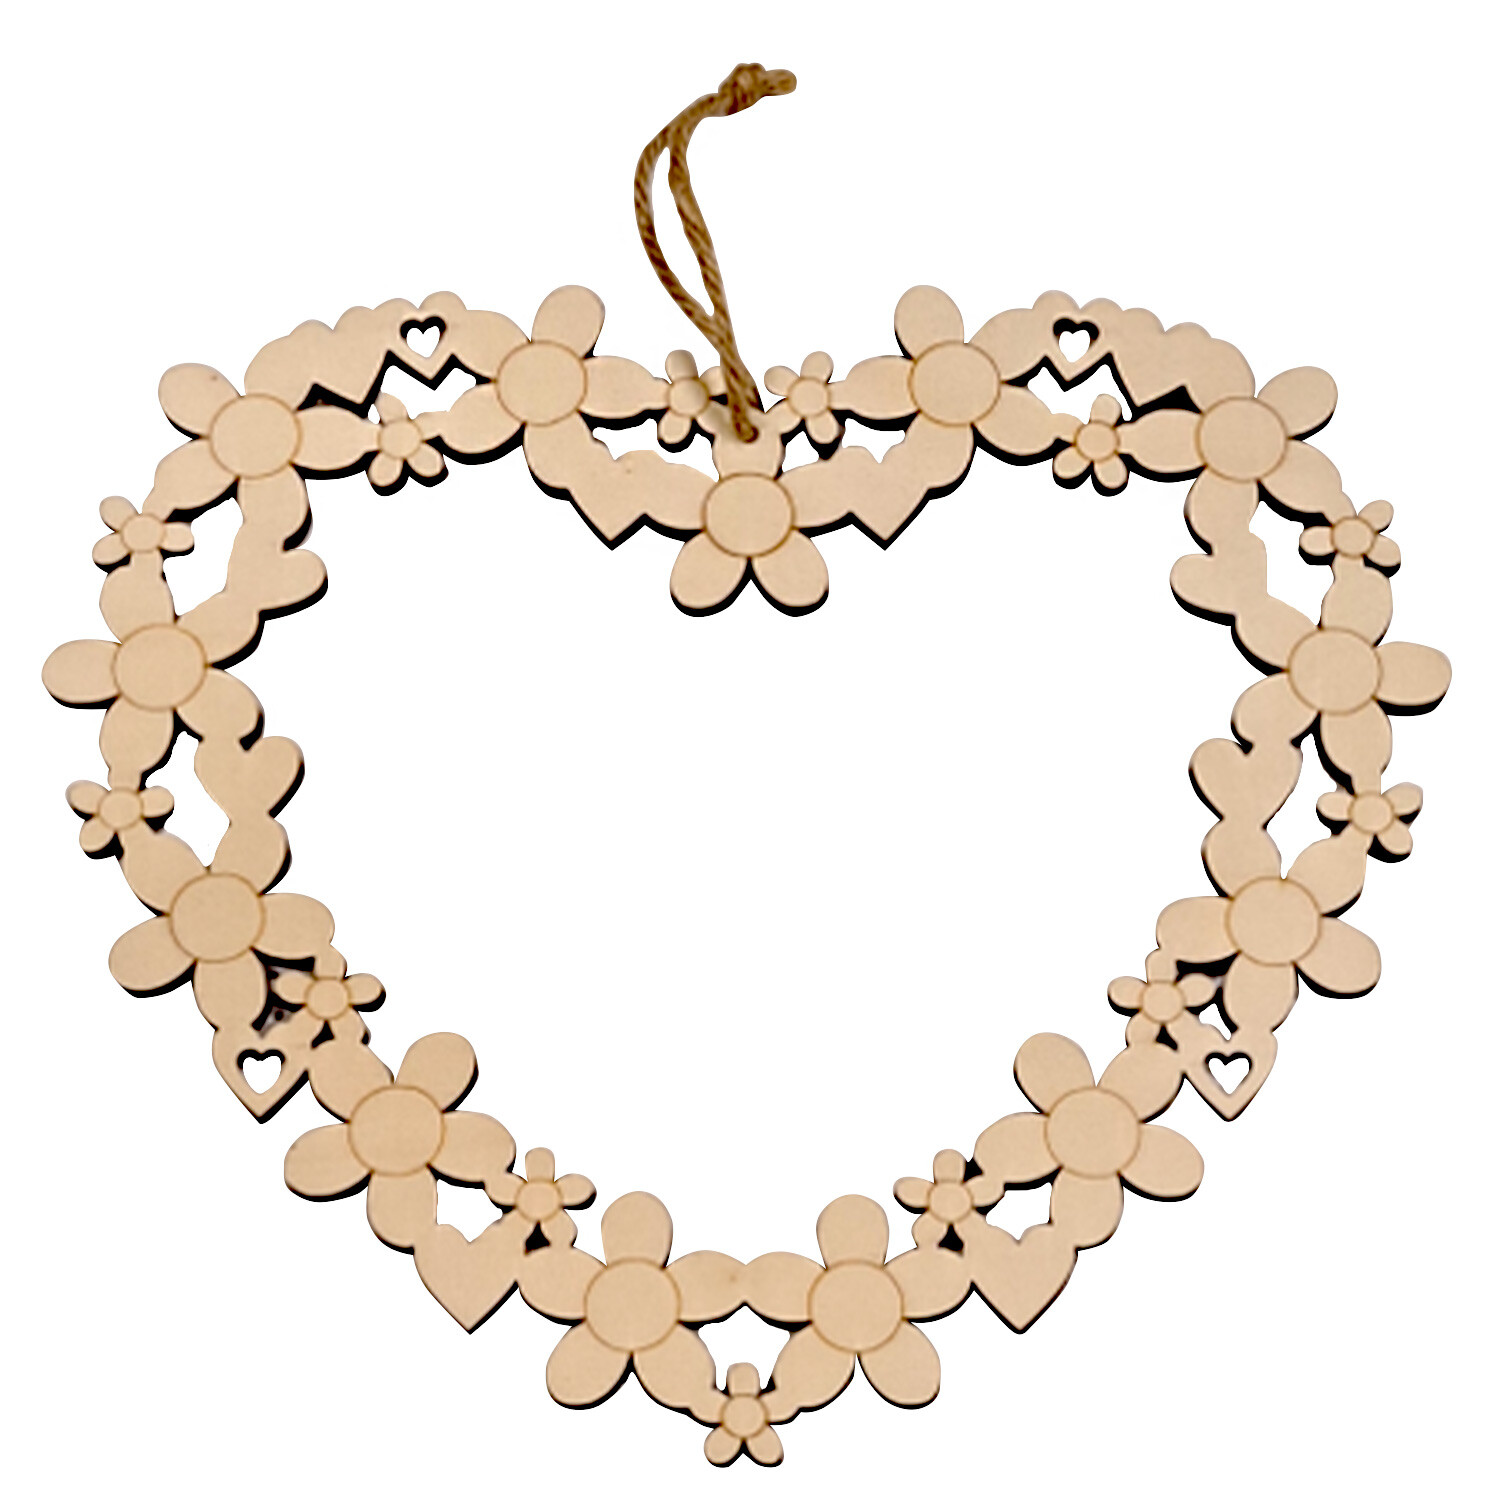 Decorate Your Own Wooden Heart Wreath Image